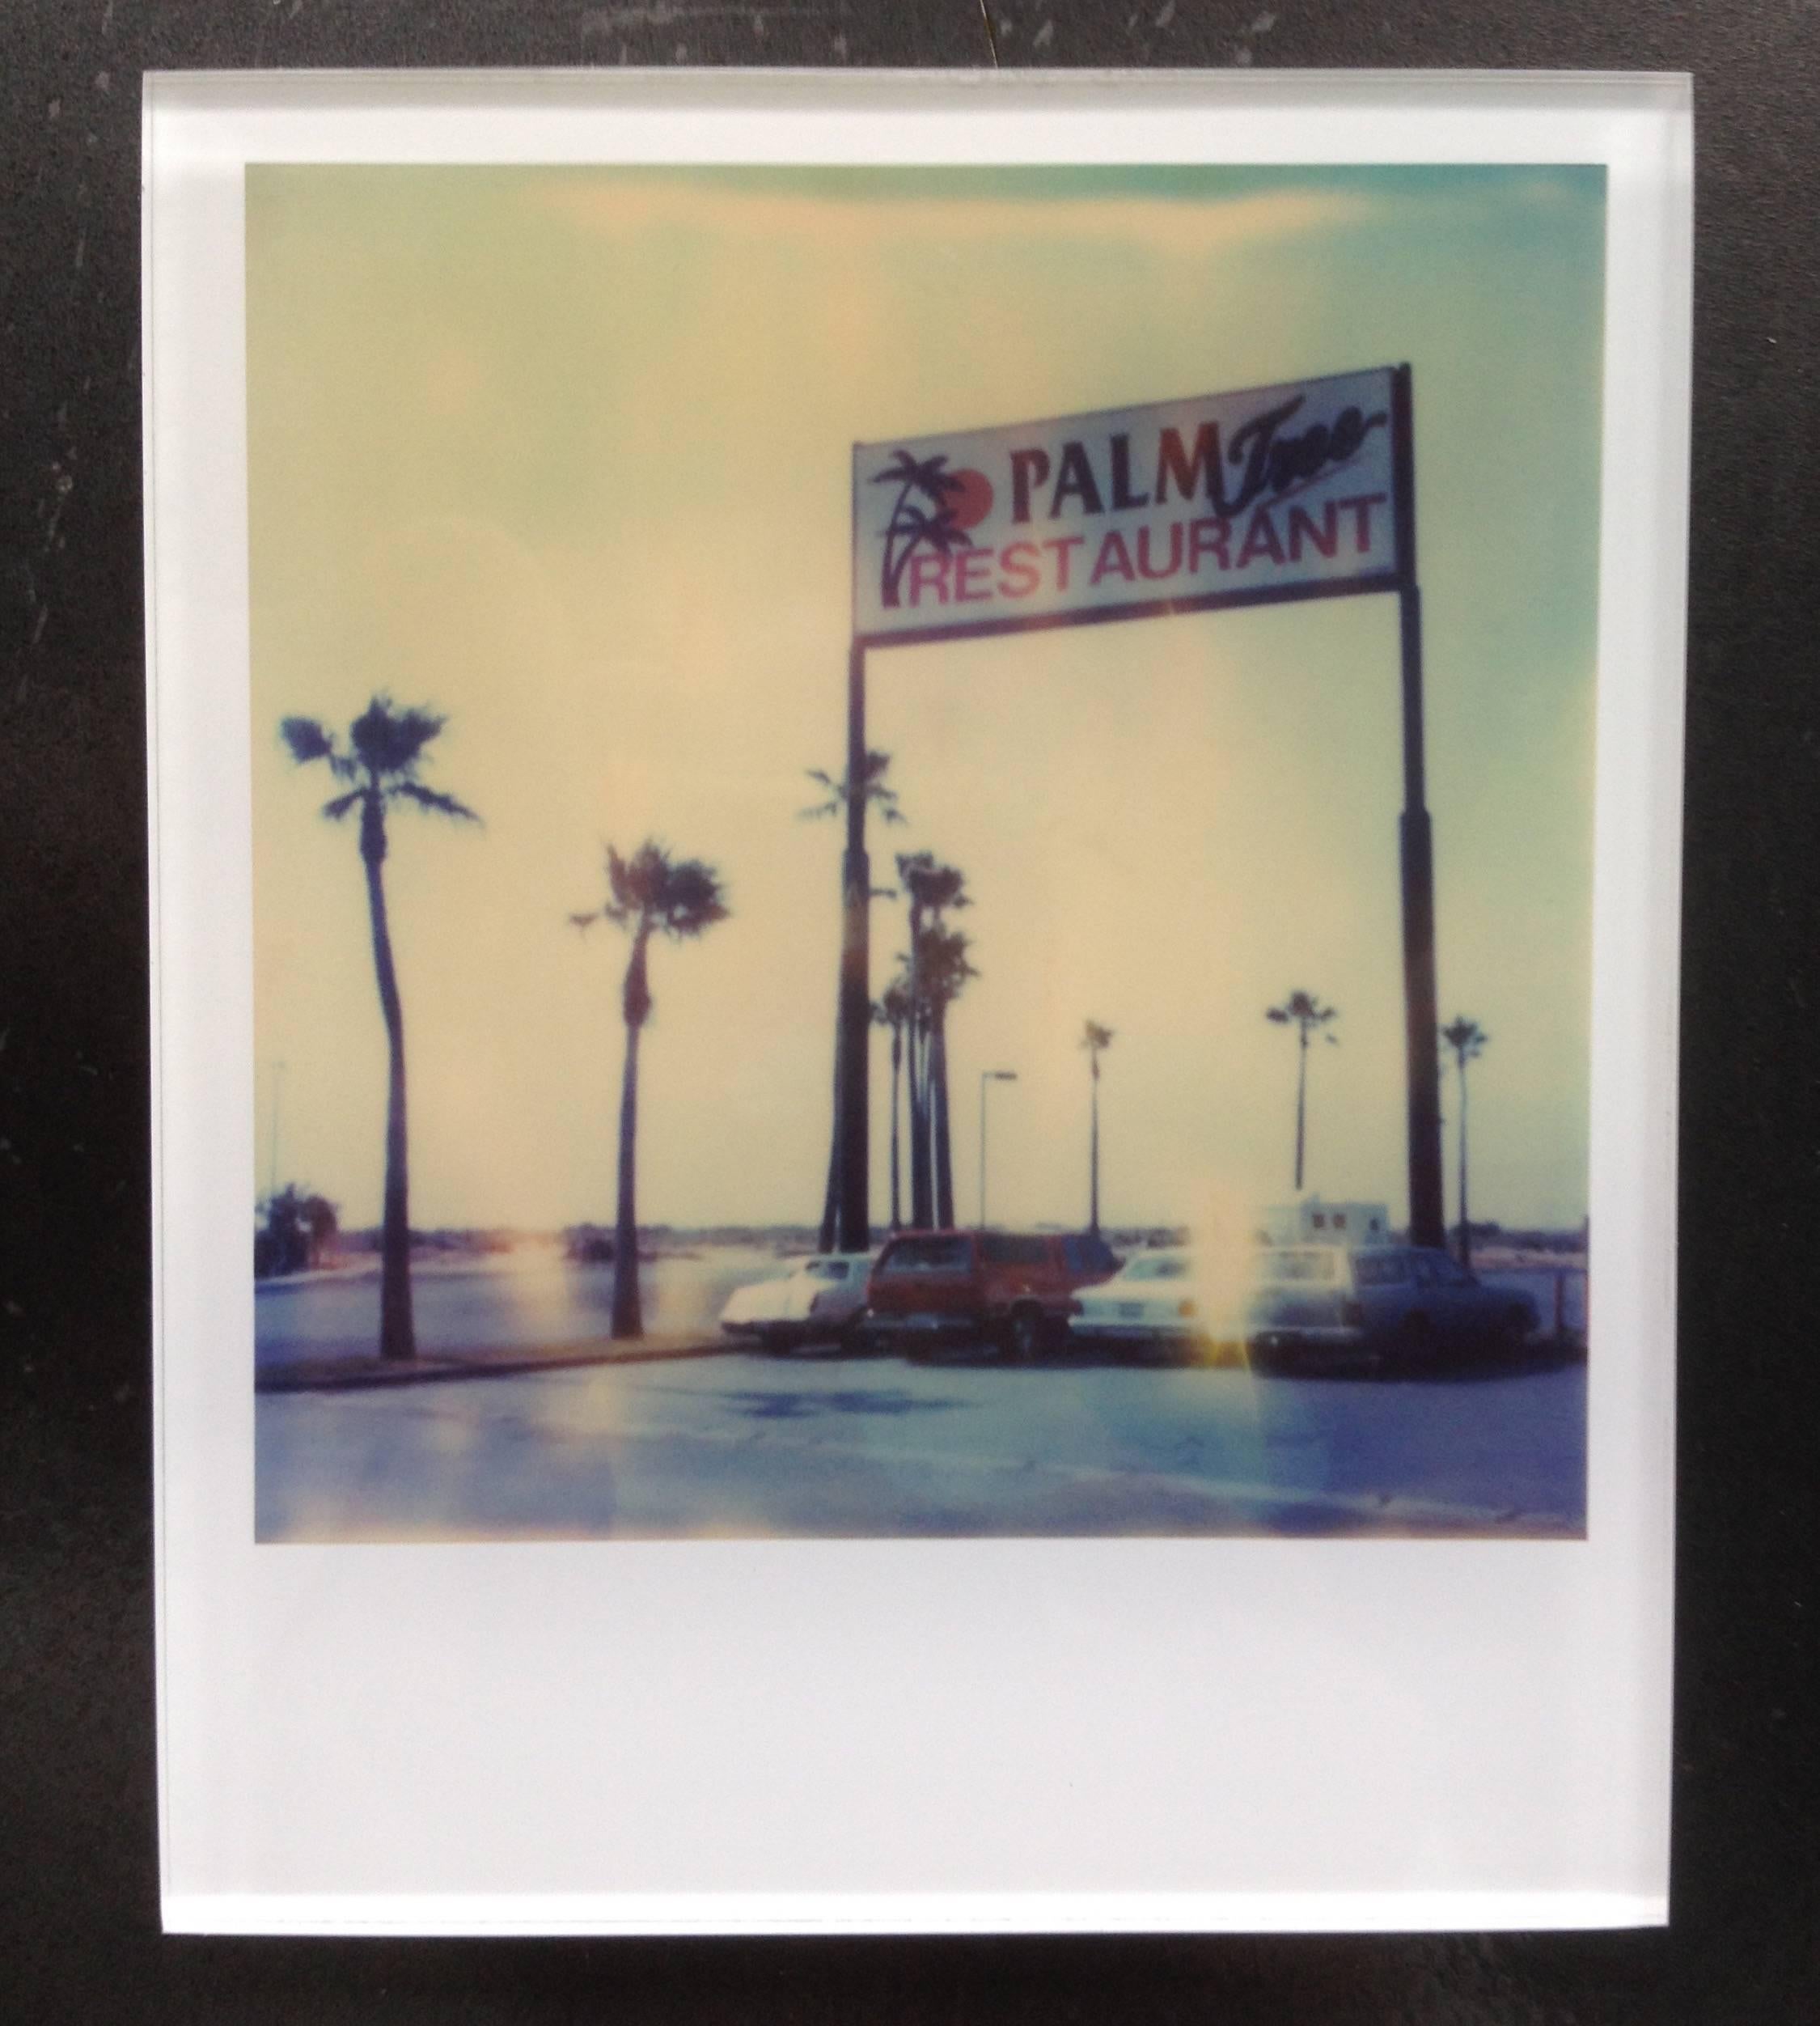 Stefanie Schneider's Minis
'Palm Tree Restaurant', 1999
signed and signature brand on verso
Lambda digital Color Photographs based on a Polaroid

Polaroid sized open Editions 1999-2013
10.7 x 8.8cm (Image 7.9x7.7cm)
mounted: sandwiched in between